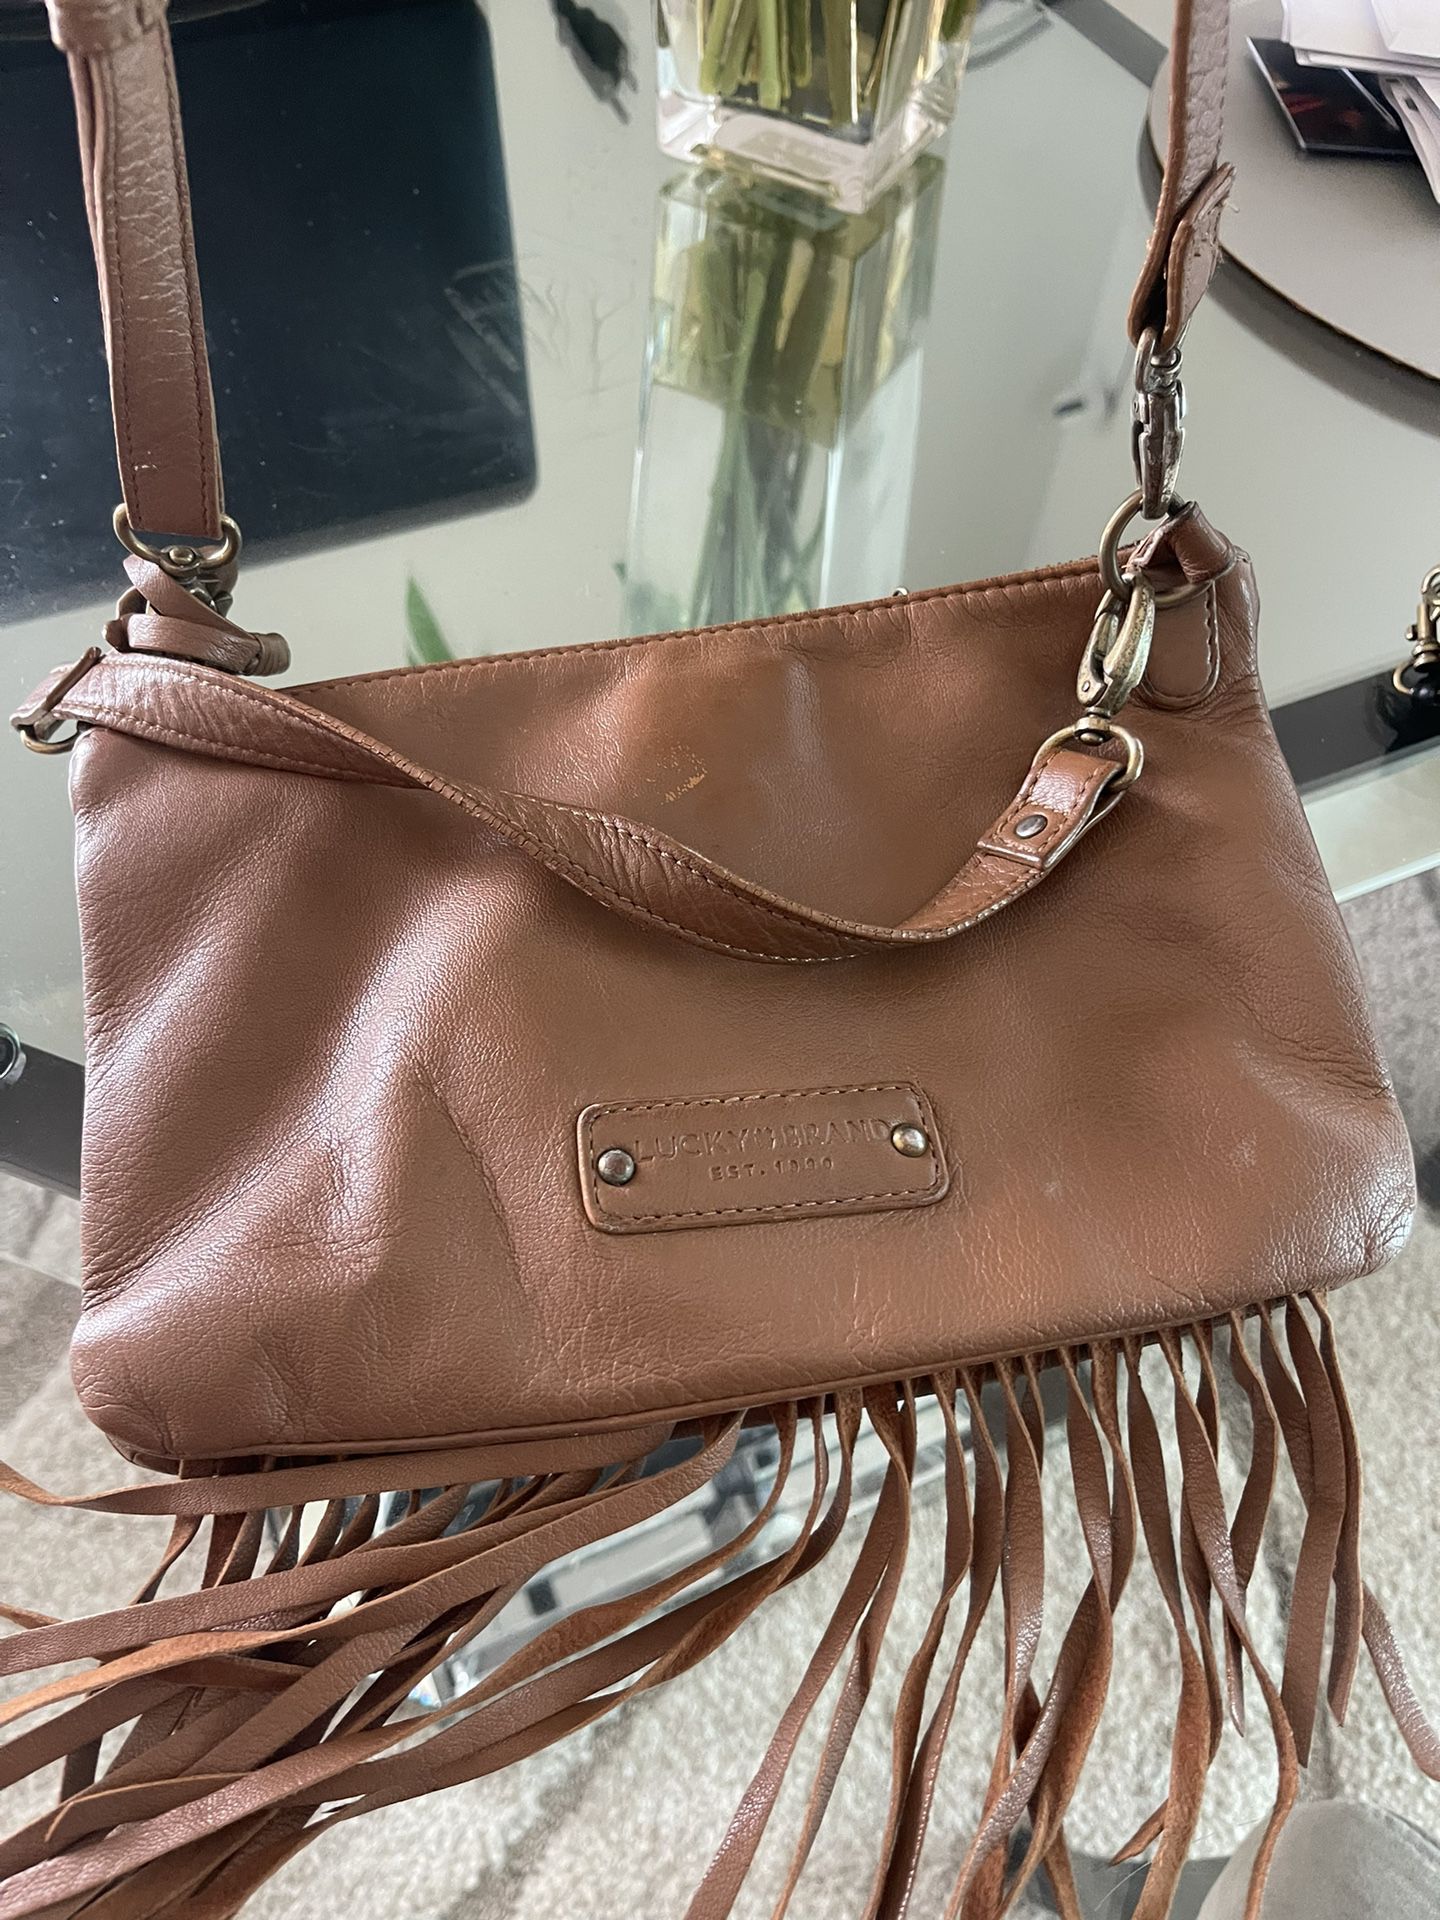 Lucky Brand Brown Tan Leather Cross hold 